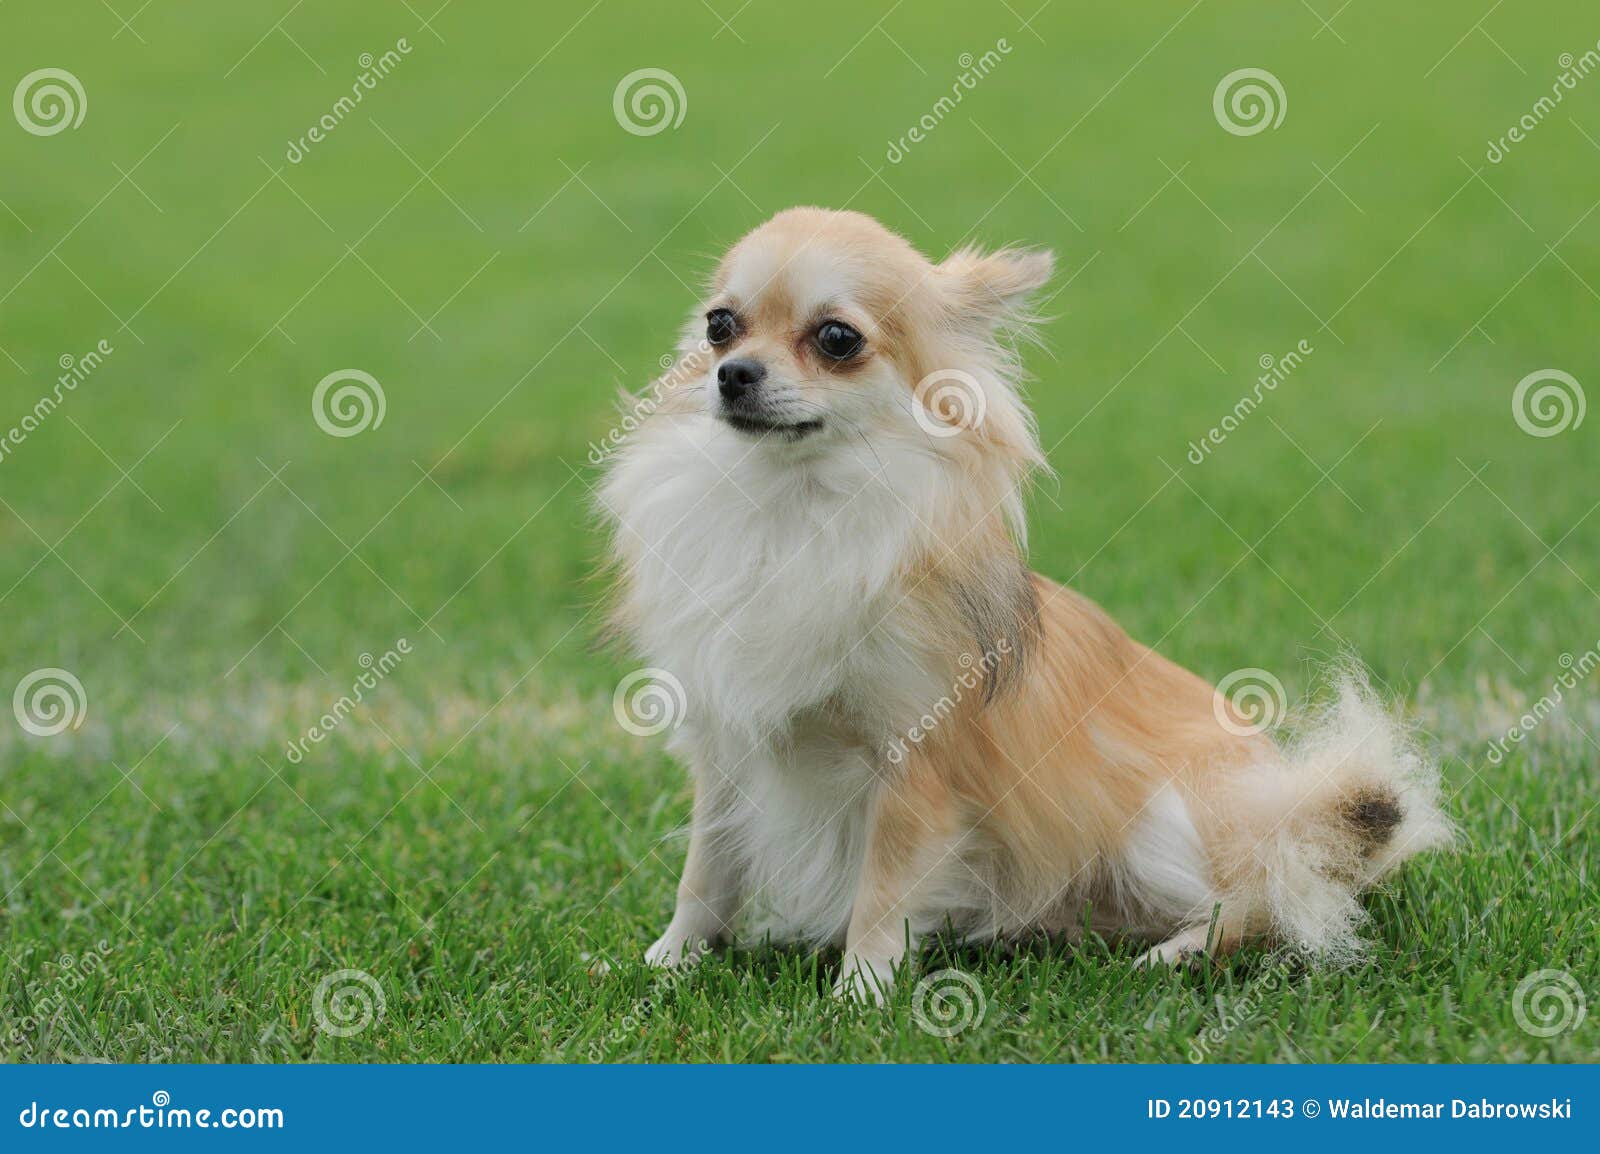 chihuahua longhaired dog portrait